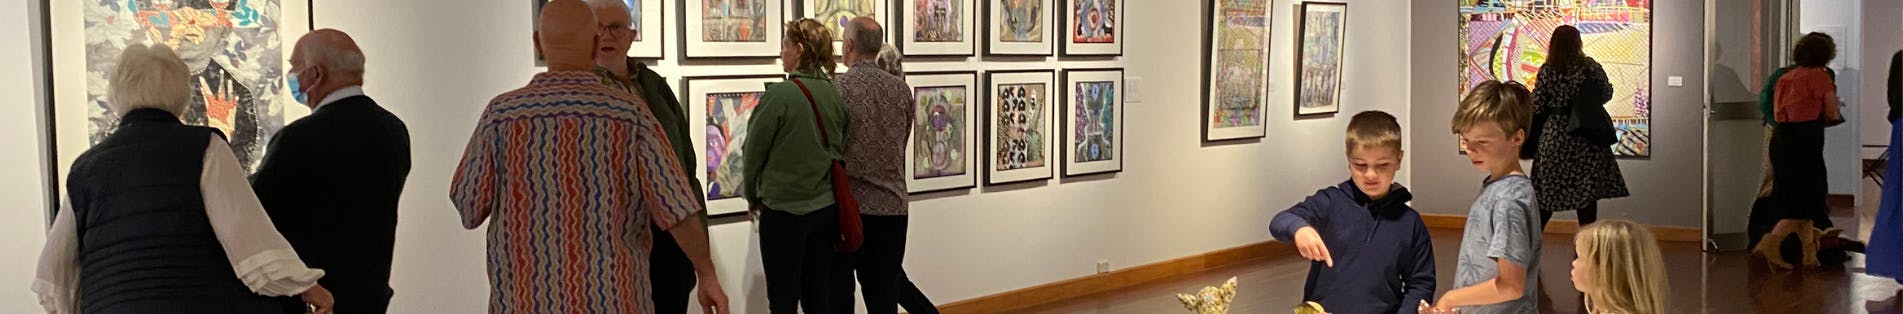 People at the Shoalhaven Regional Gallery